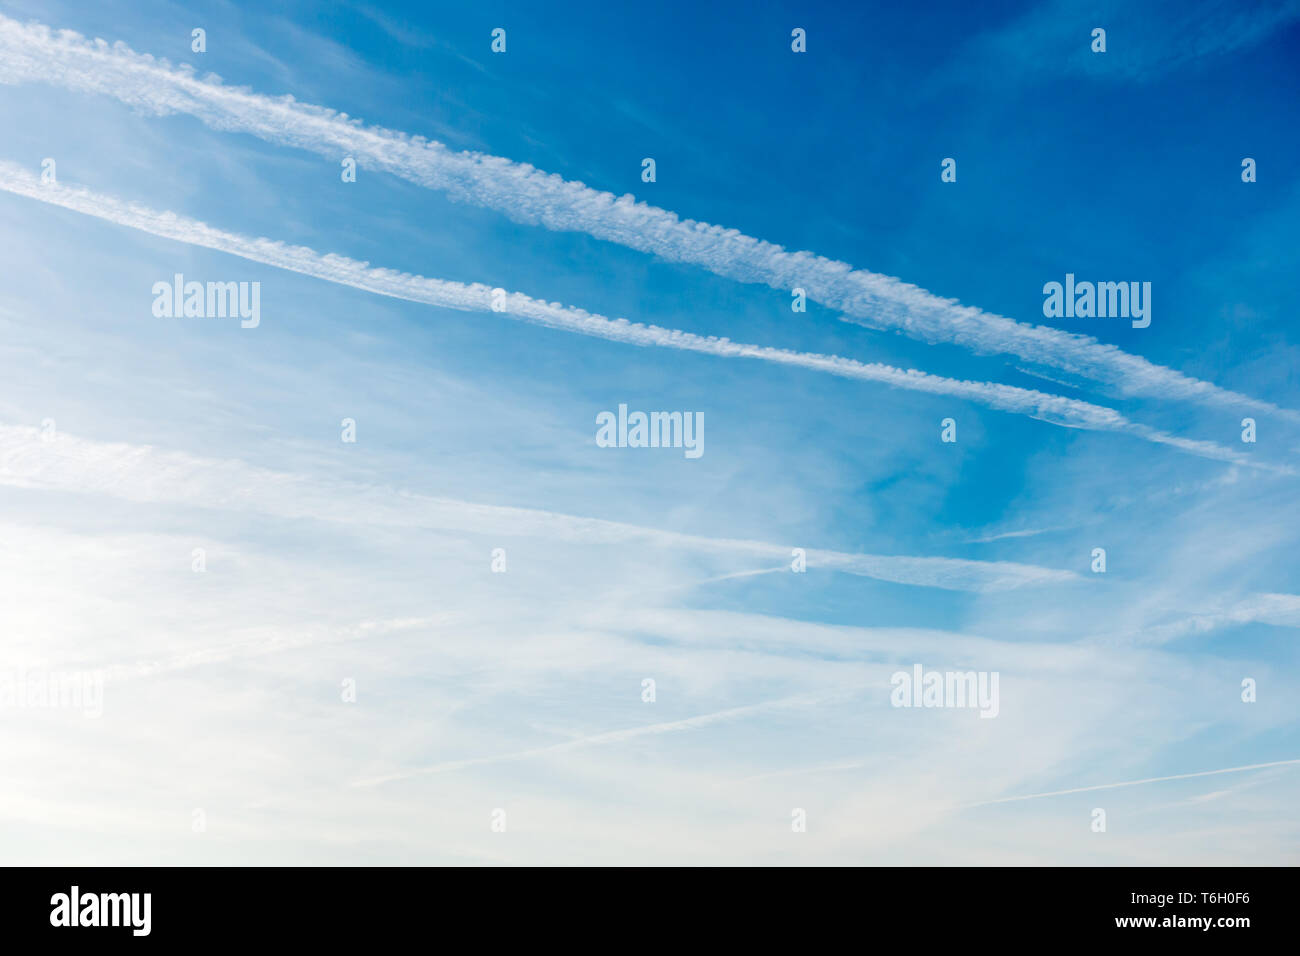 Blue sky covered with many chemtrails, contrails. Stock Photo